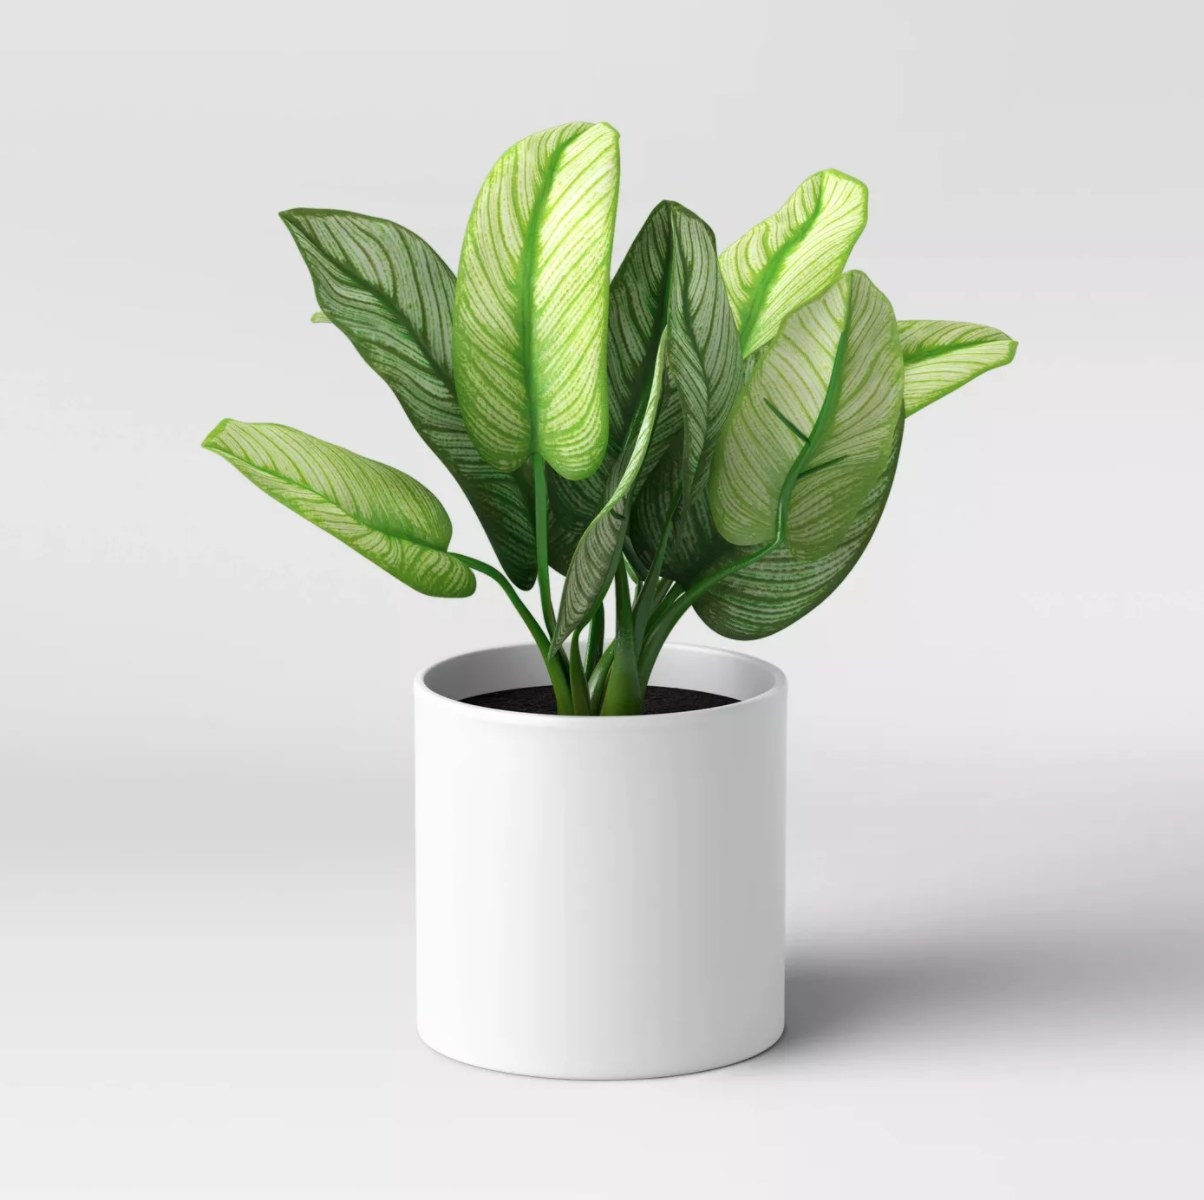 the artificial plant in a white pot